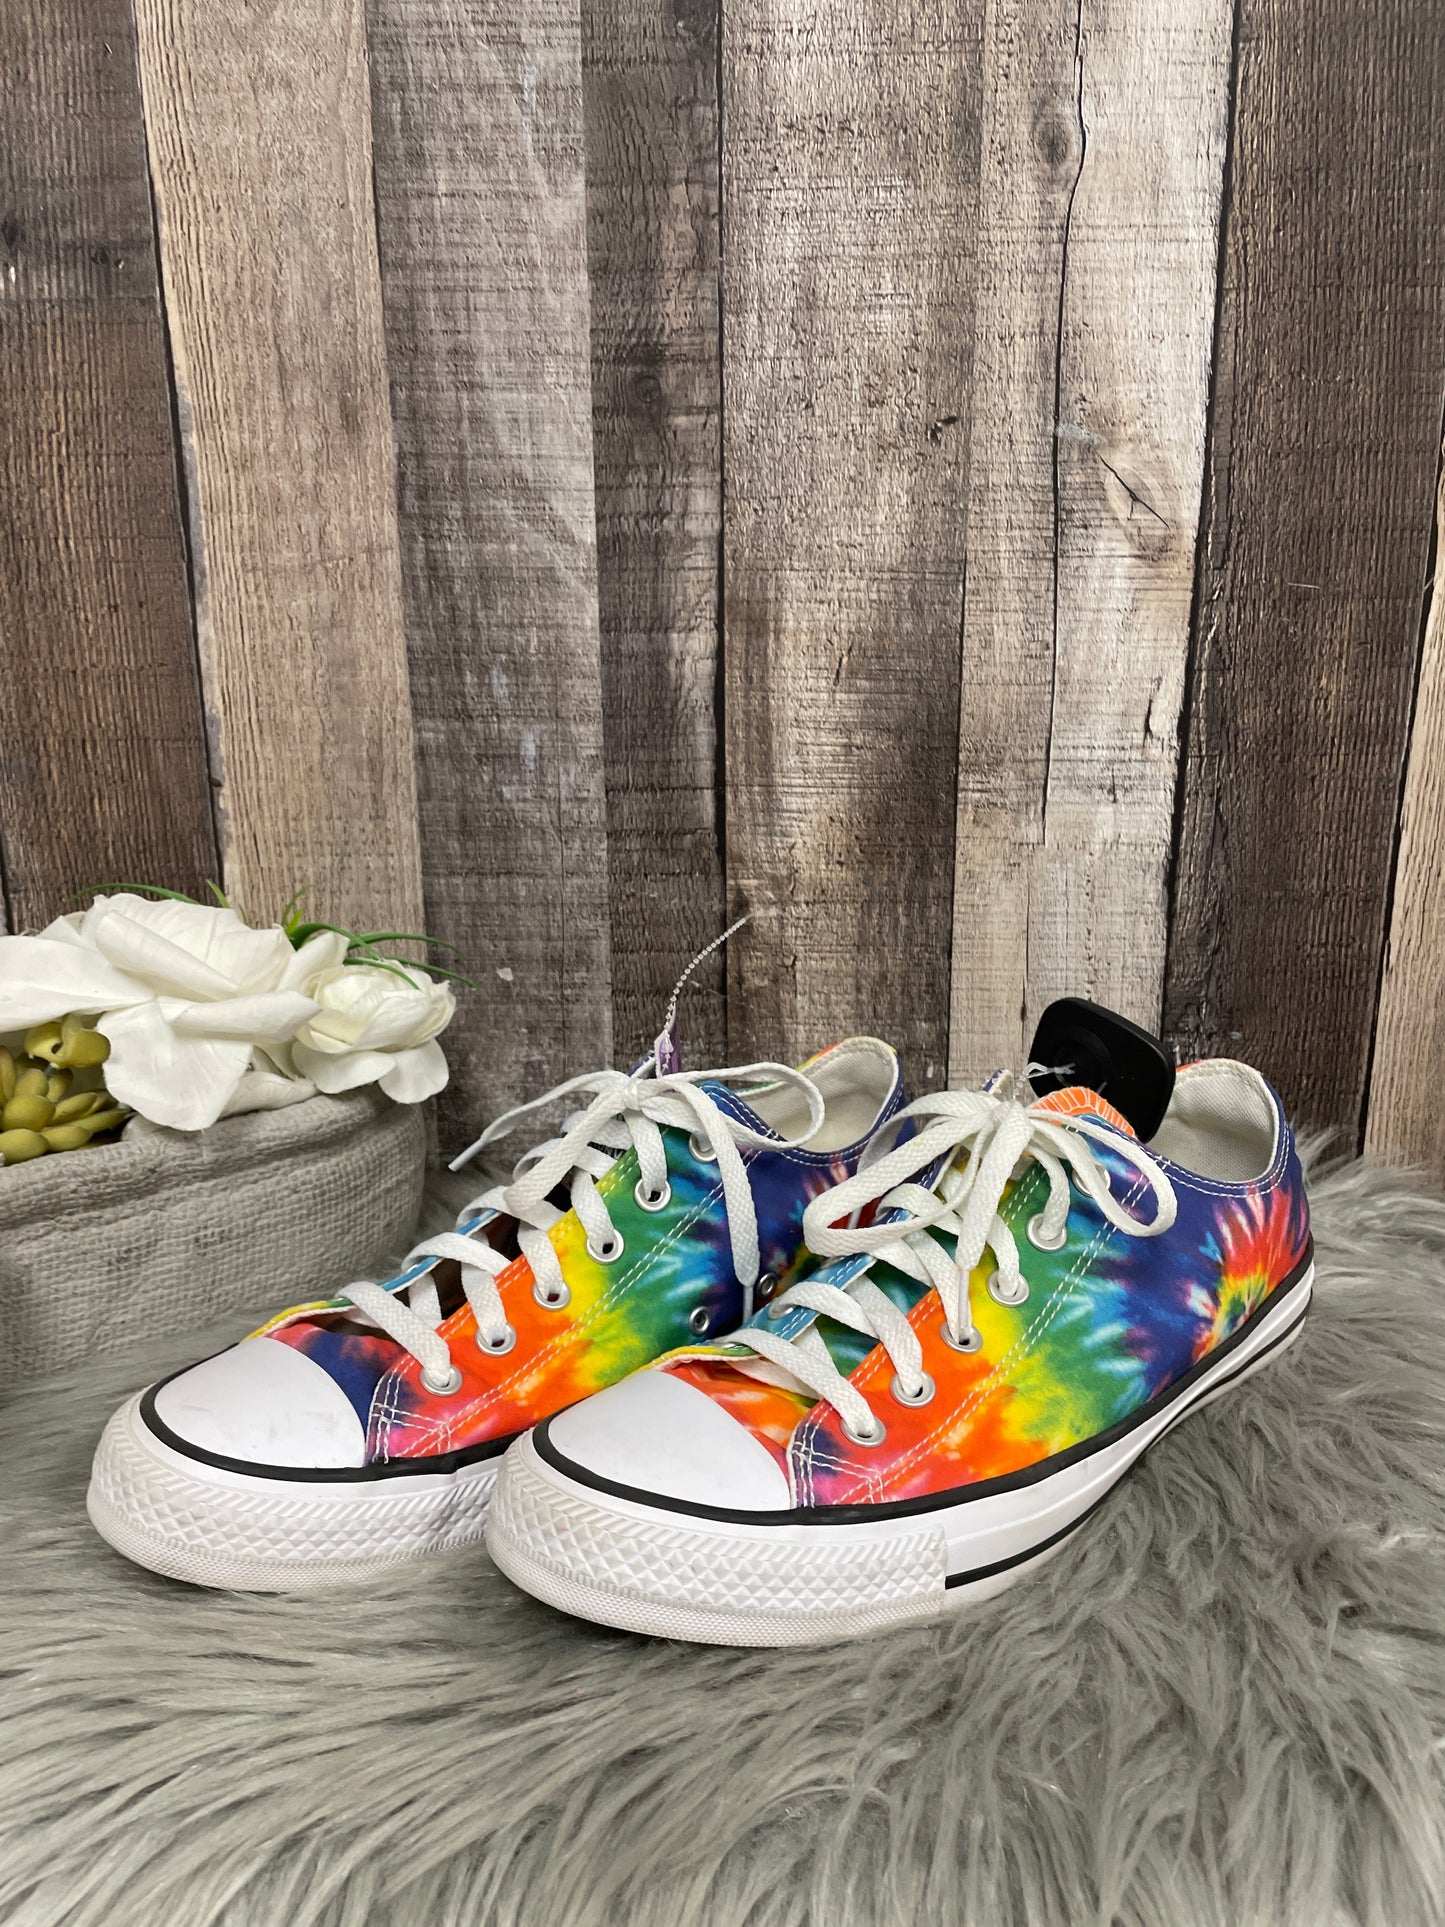 Rainbow Print Shoes Sneakers Converse, Size 10